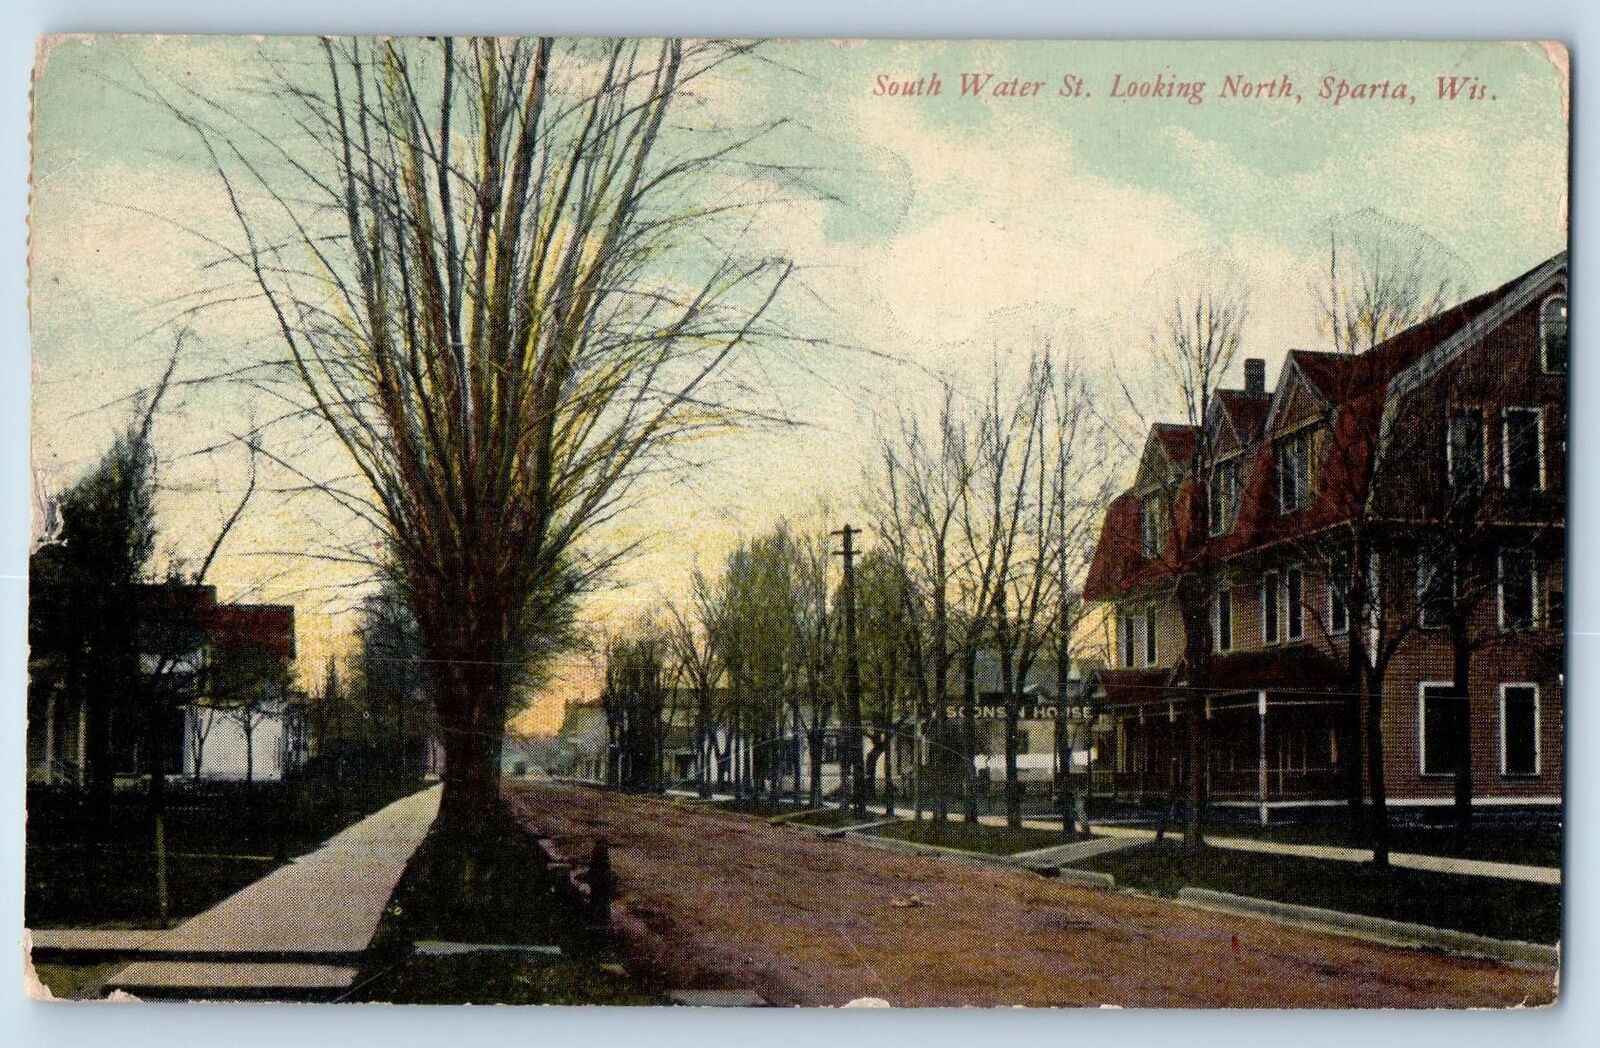 1923 South Water Street Dirt Road Residential Area Sparta Wisconsin WI Postcard